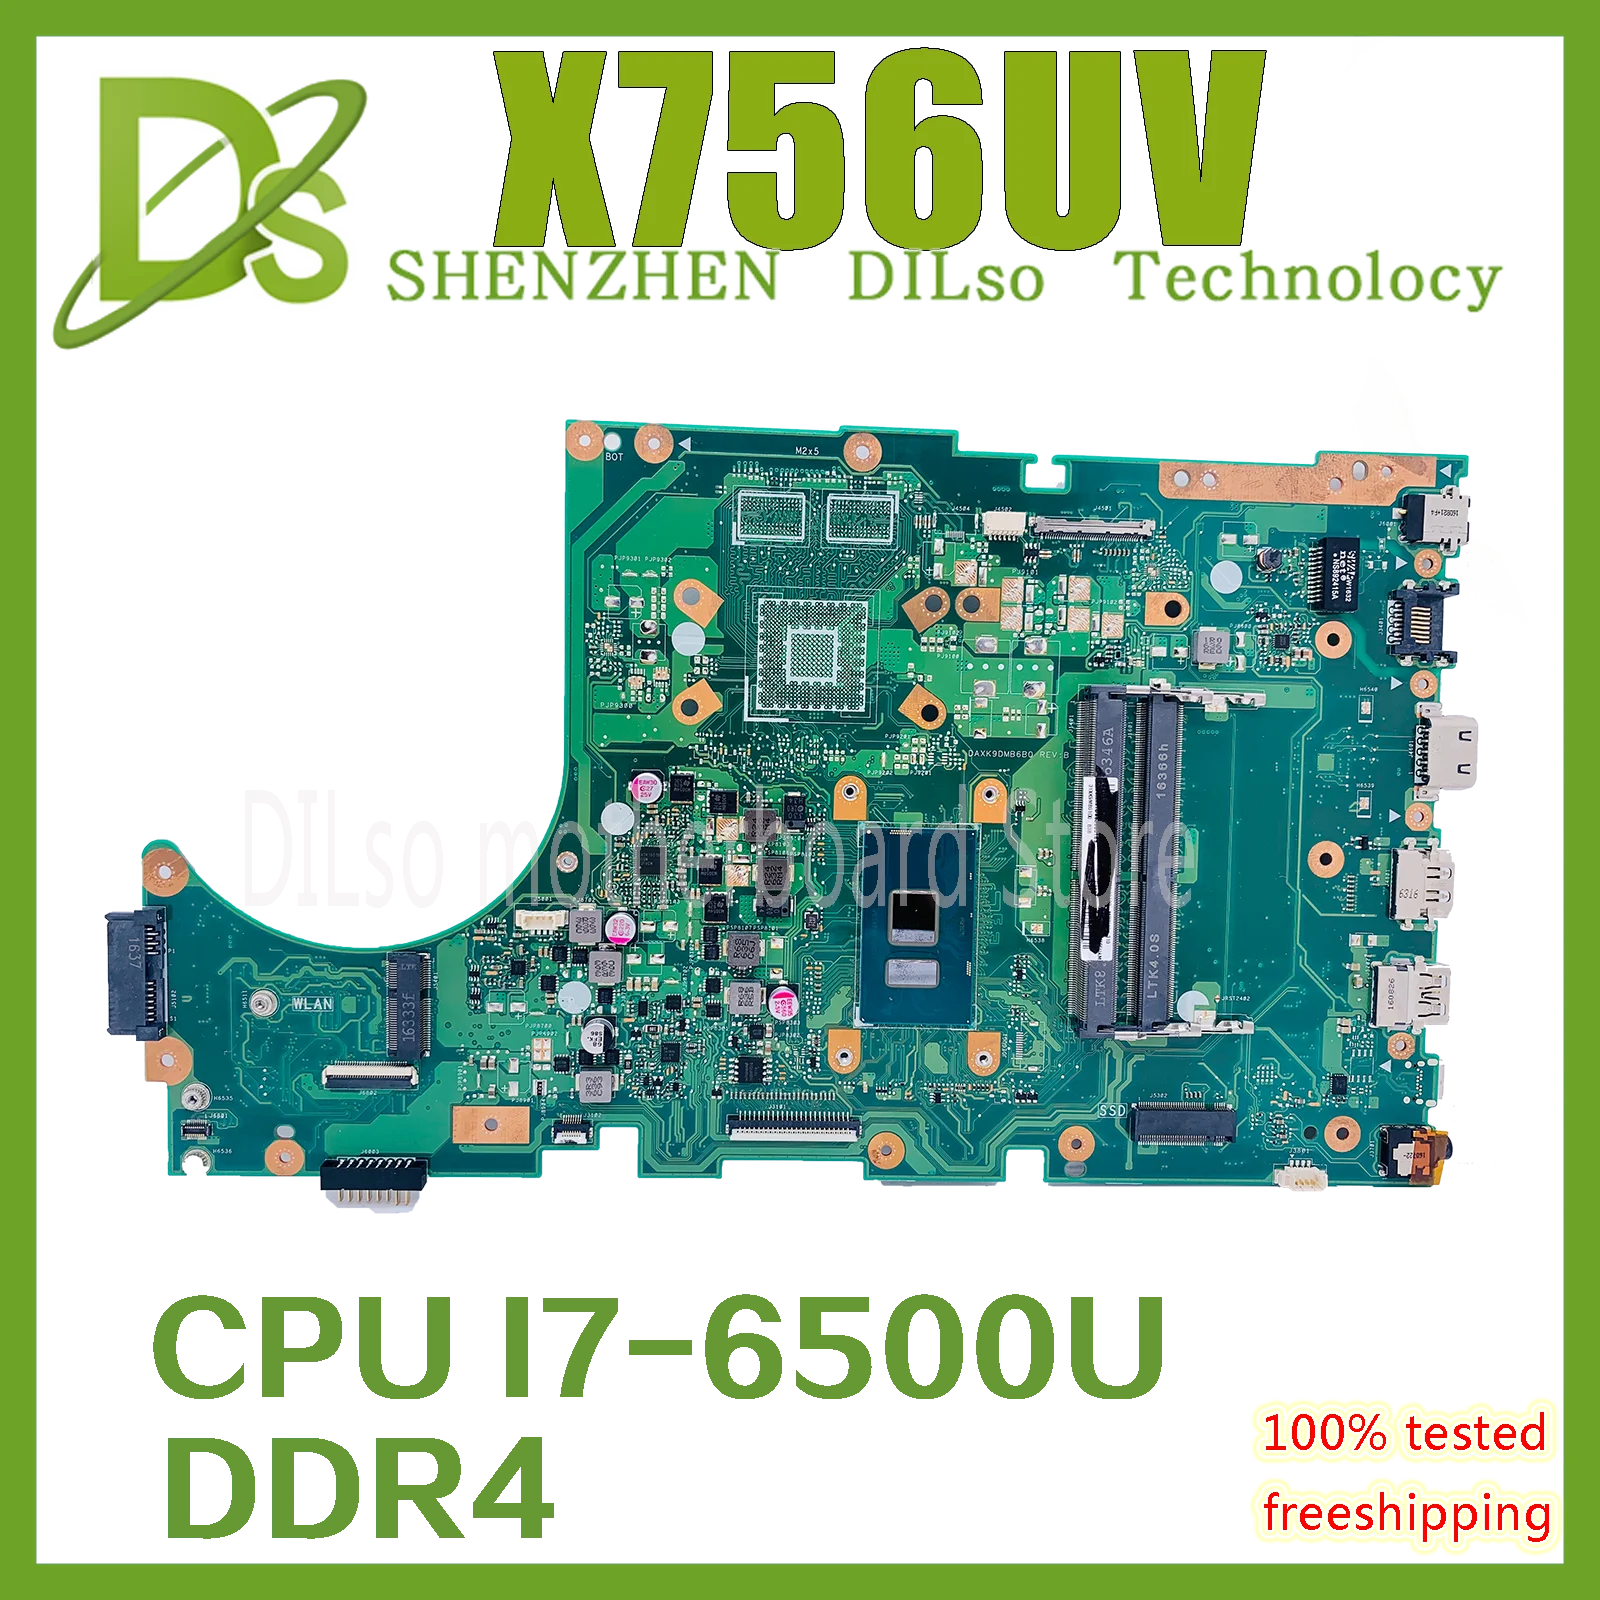 

KEFU X756UV Motherboard is suitable For Asus X756UV X756UAK X756UXM X756UQK X756UW Laptop I7-6500U CPU DDR4 100% test OK